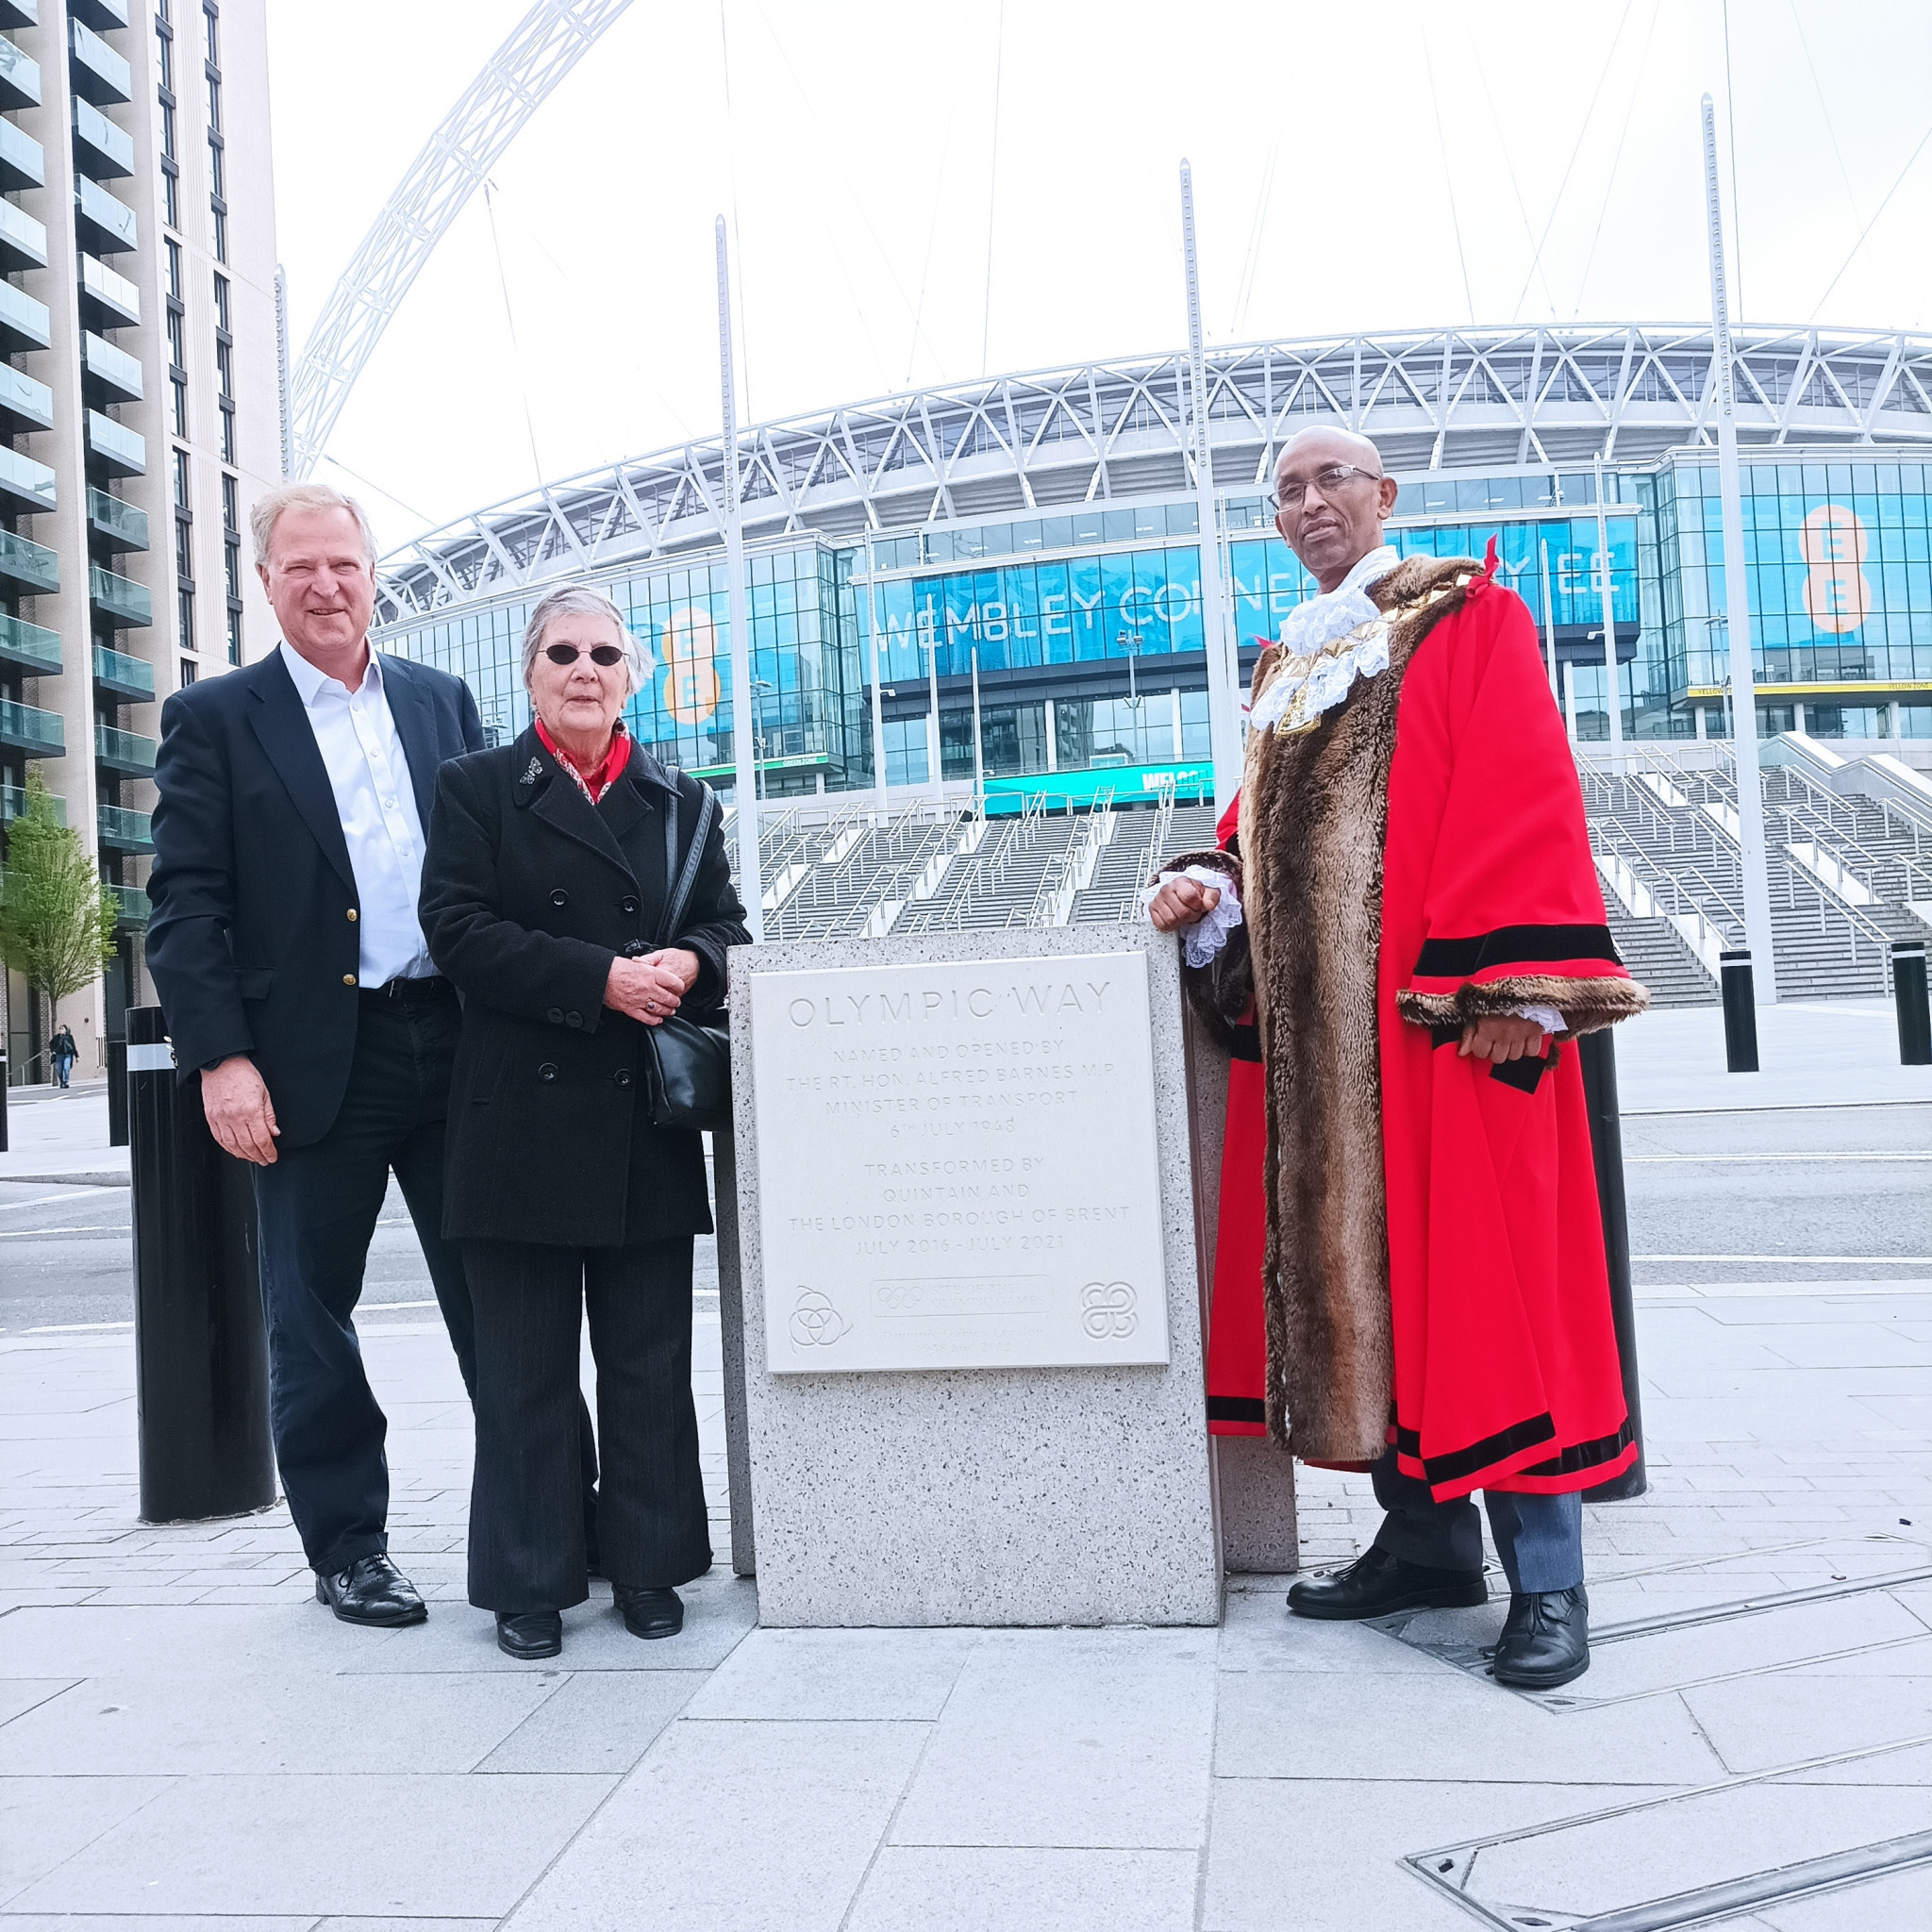 Plaques unveiled to commemorate 1948 Olympics at Wembley Stadium 